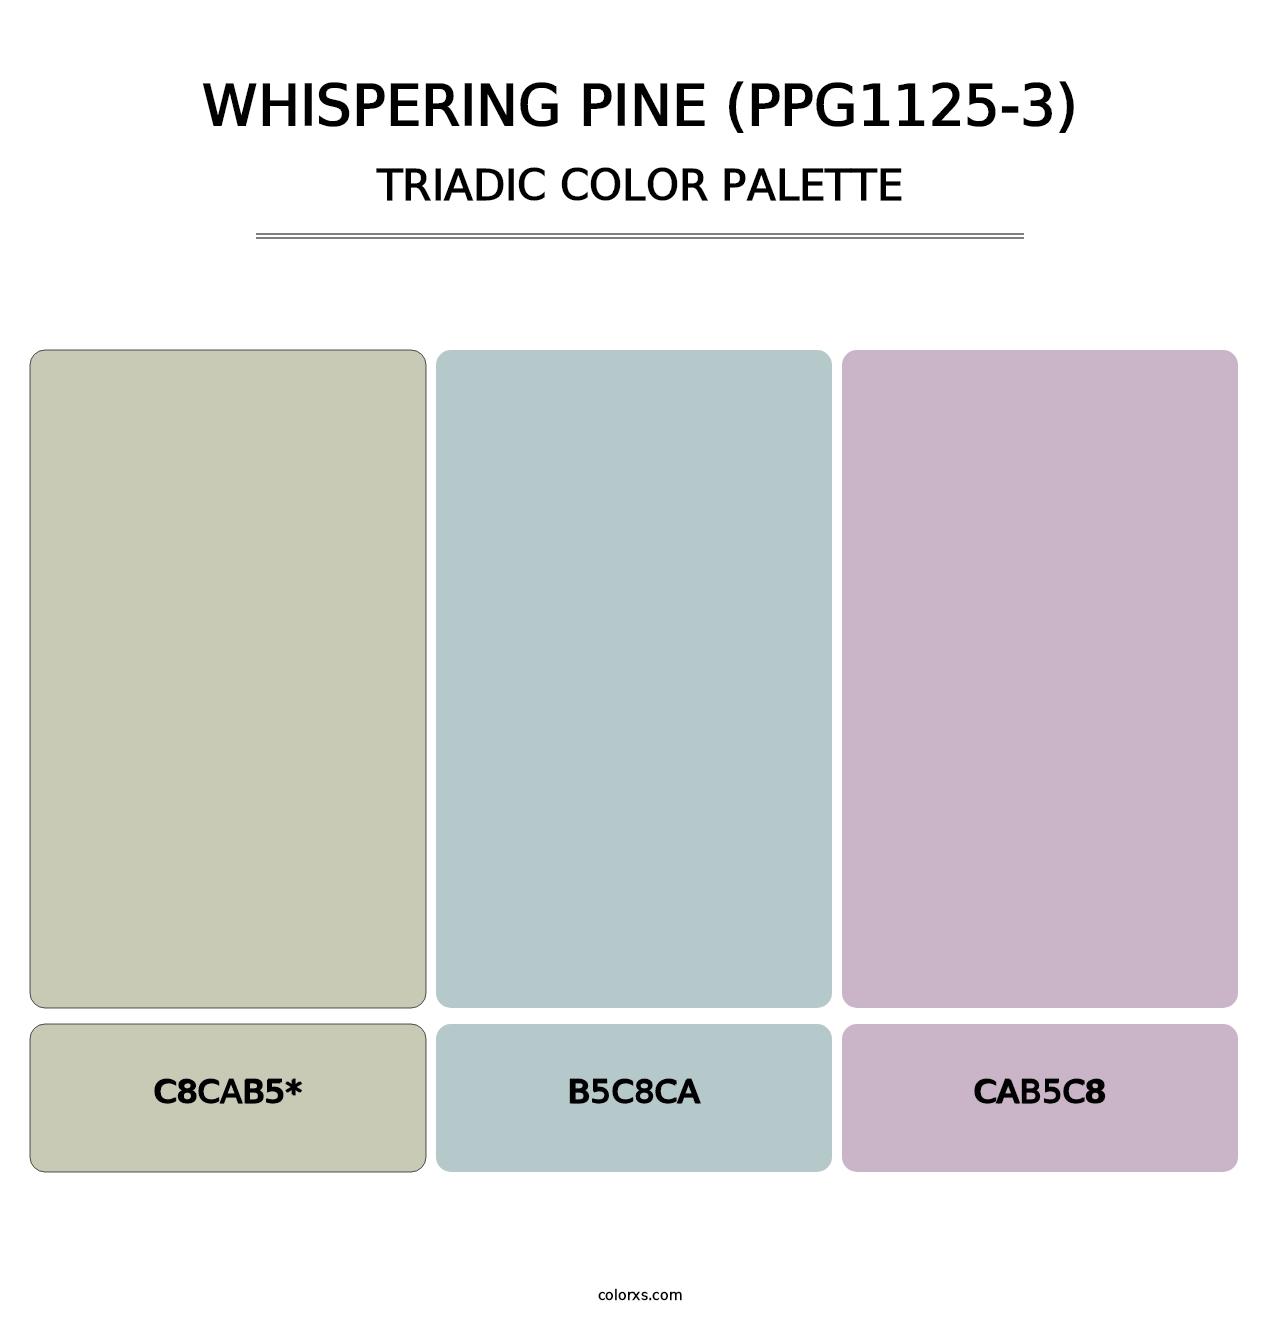 Whispering Pine (PPG1125-3) - Triadic Color Palette